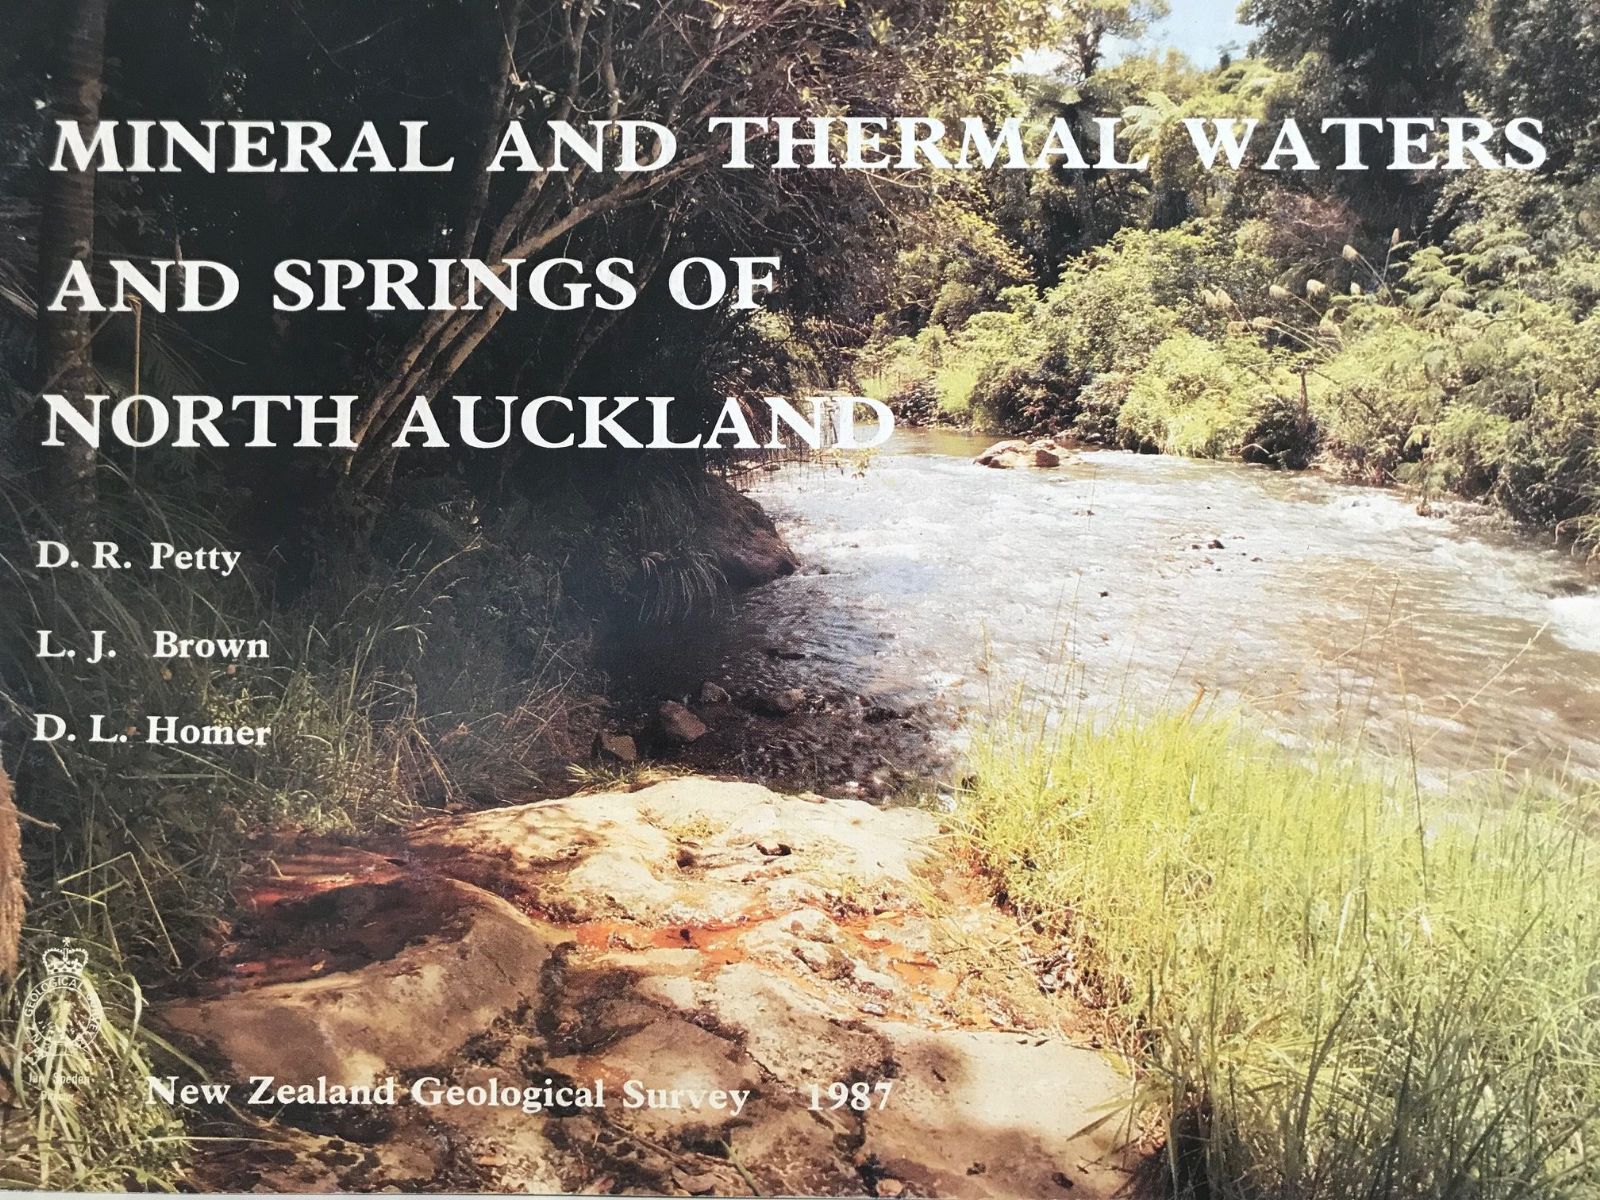 MINERAL AND THERMAL WATERS AND SPRINGS of North Auckland